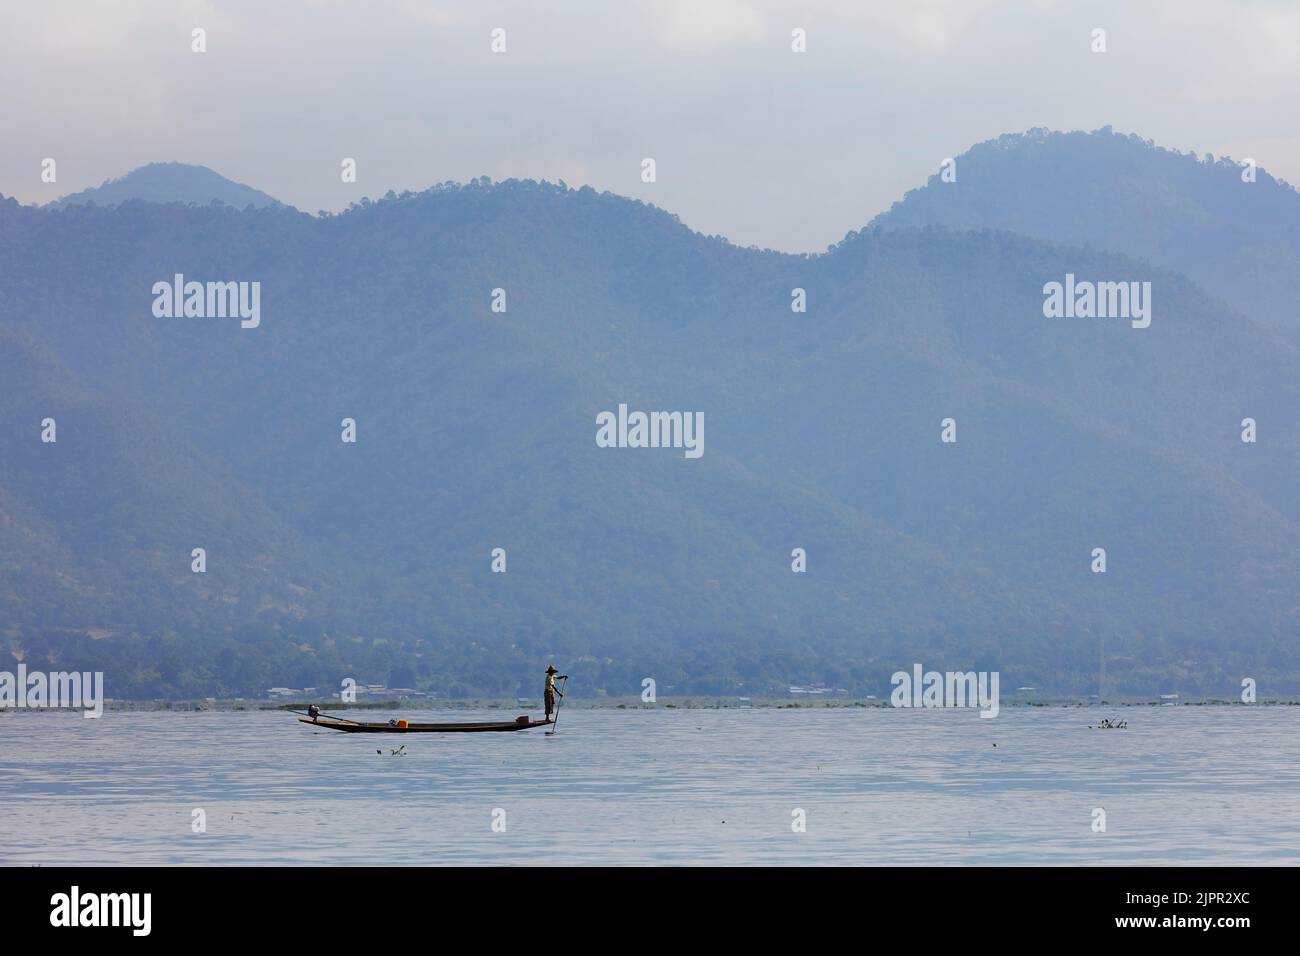 A traditional Intha Burmese One-Legged fisherman on his wooden boat with the mountains in the background, Inle Lake, Myanmar. Stock Photo